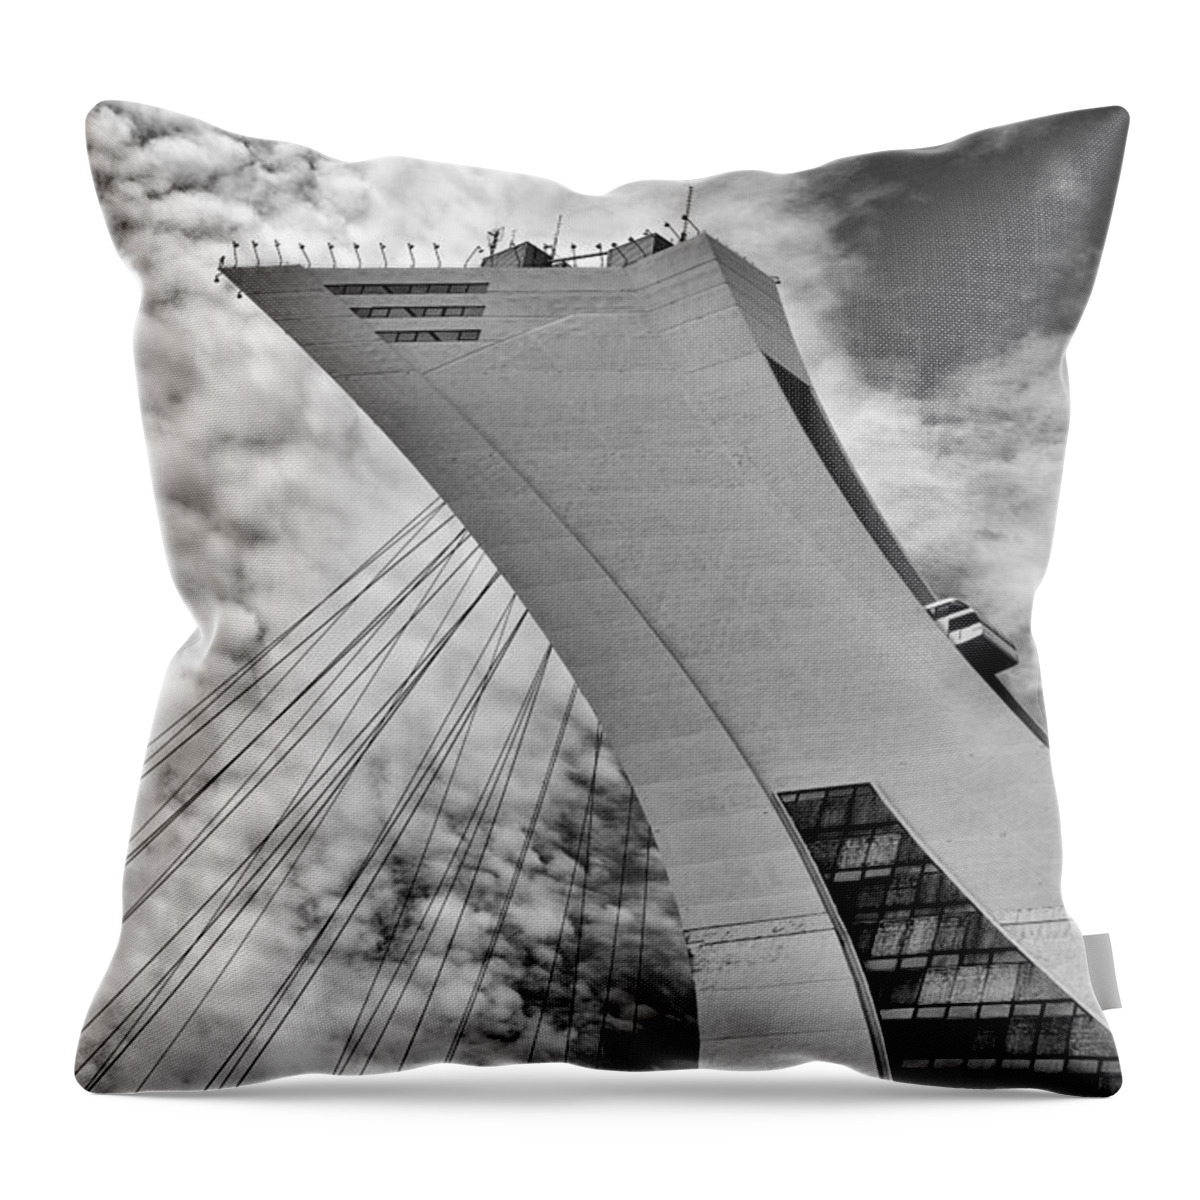 B/w Throw Pillow featuring the photograph Olympic Stadium by Eunice Gibb